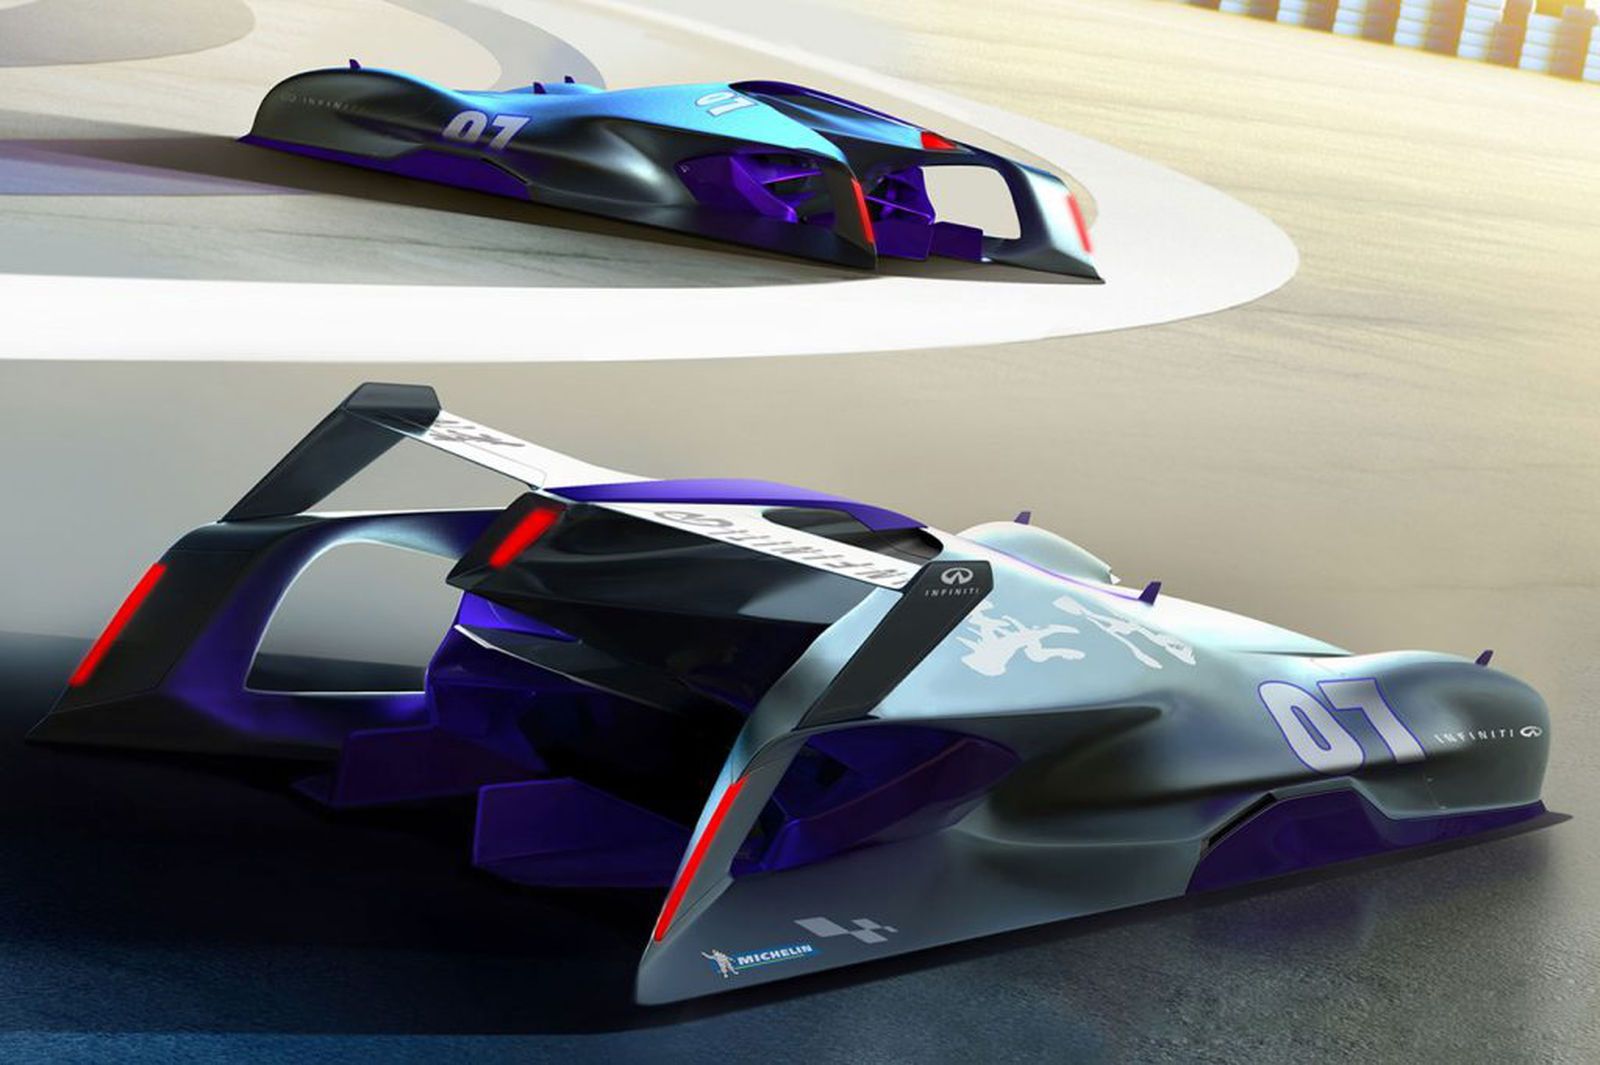 Amazing futuristic car designs from racing cars to rescue vehicles image 42